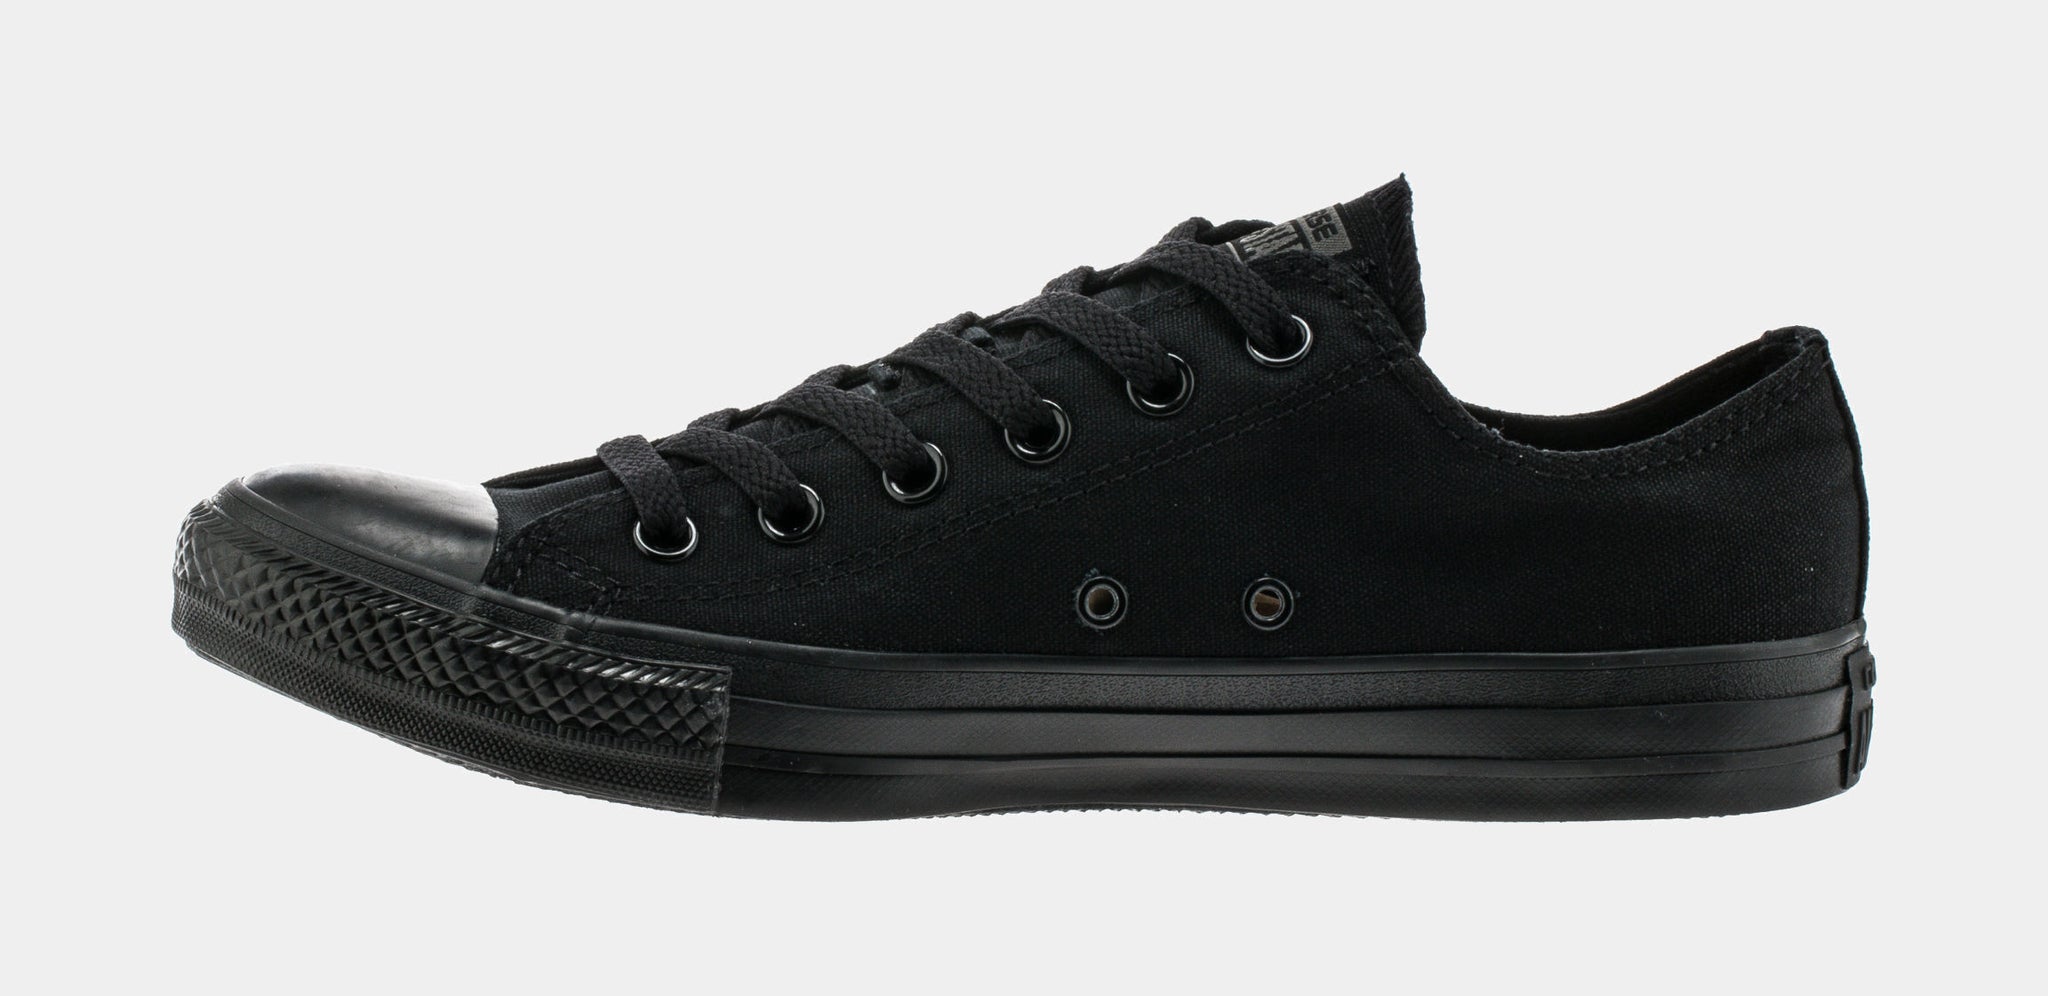 Converse Chuck Taylor All Star Classic Low Solid MonoChrome Canvas Lifestyle Shoe M5039 Shoe Palace